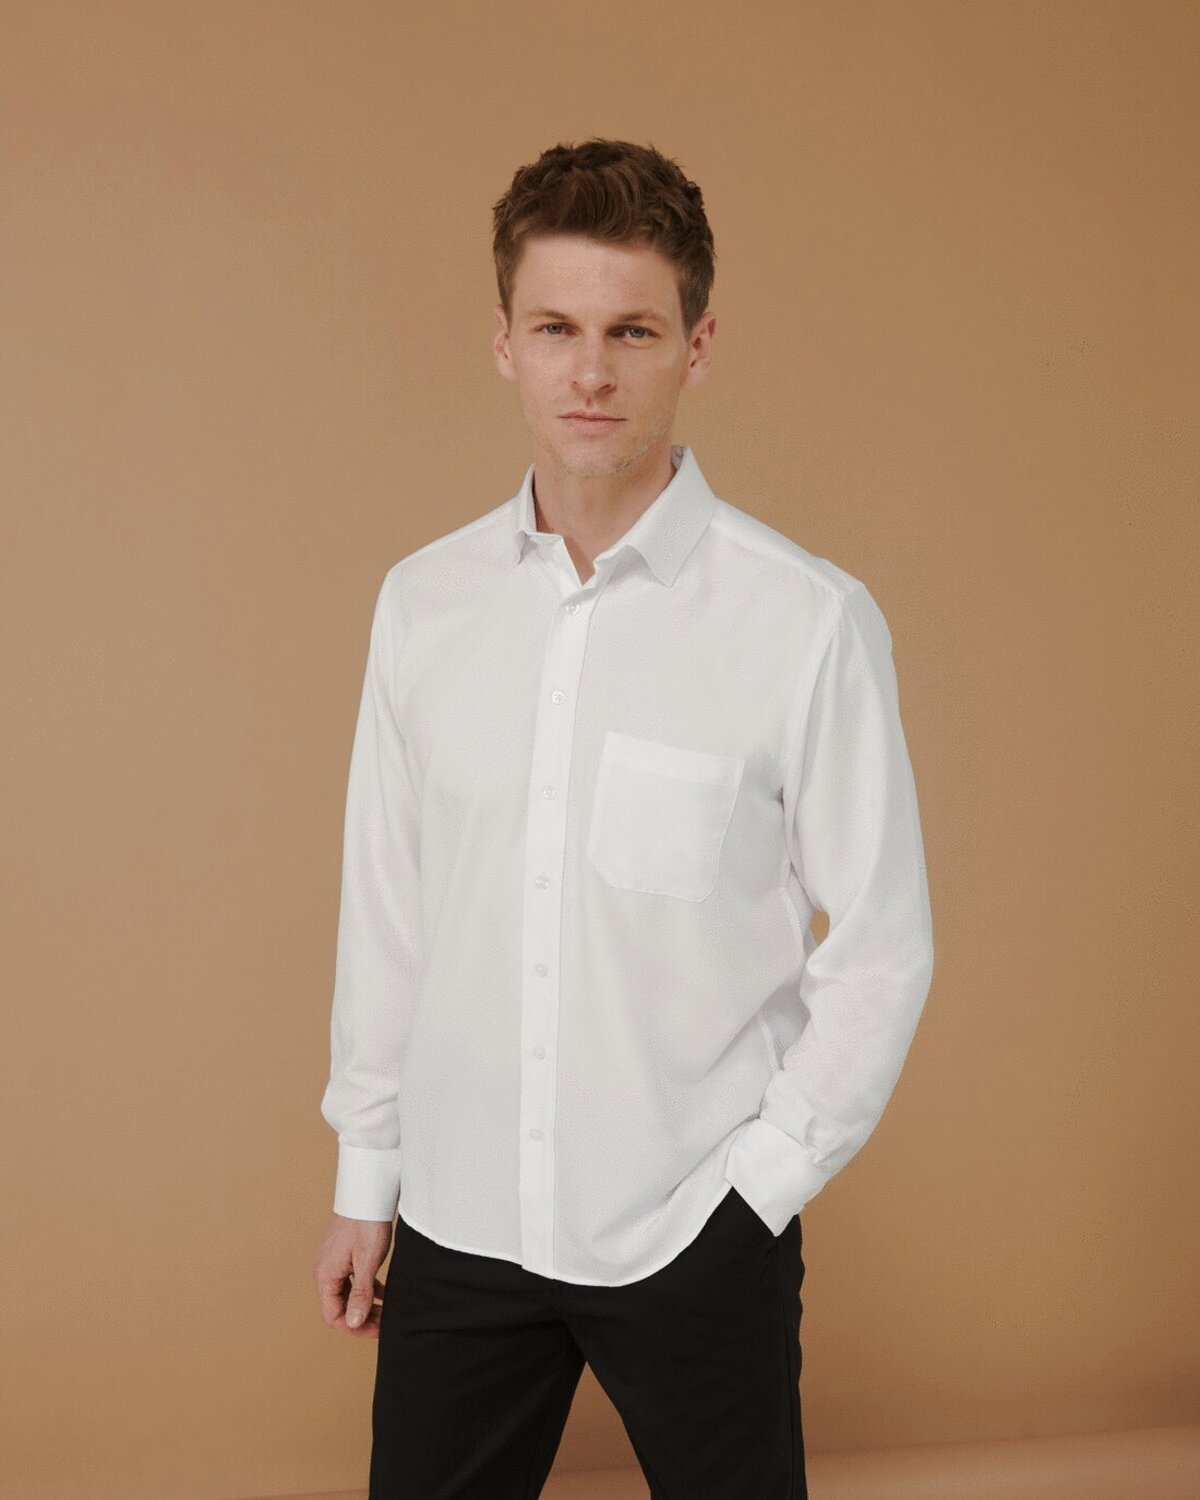 WICKING ANTI BACTERIAL QUICK DRY LONG SLEEVE SHIRT